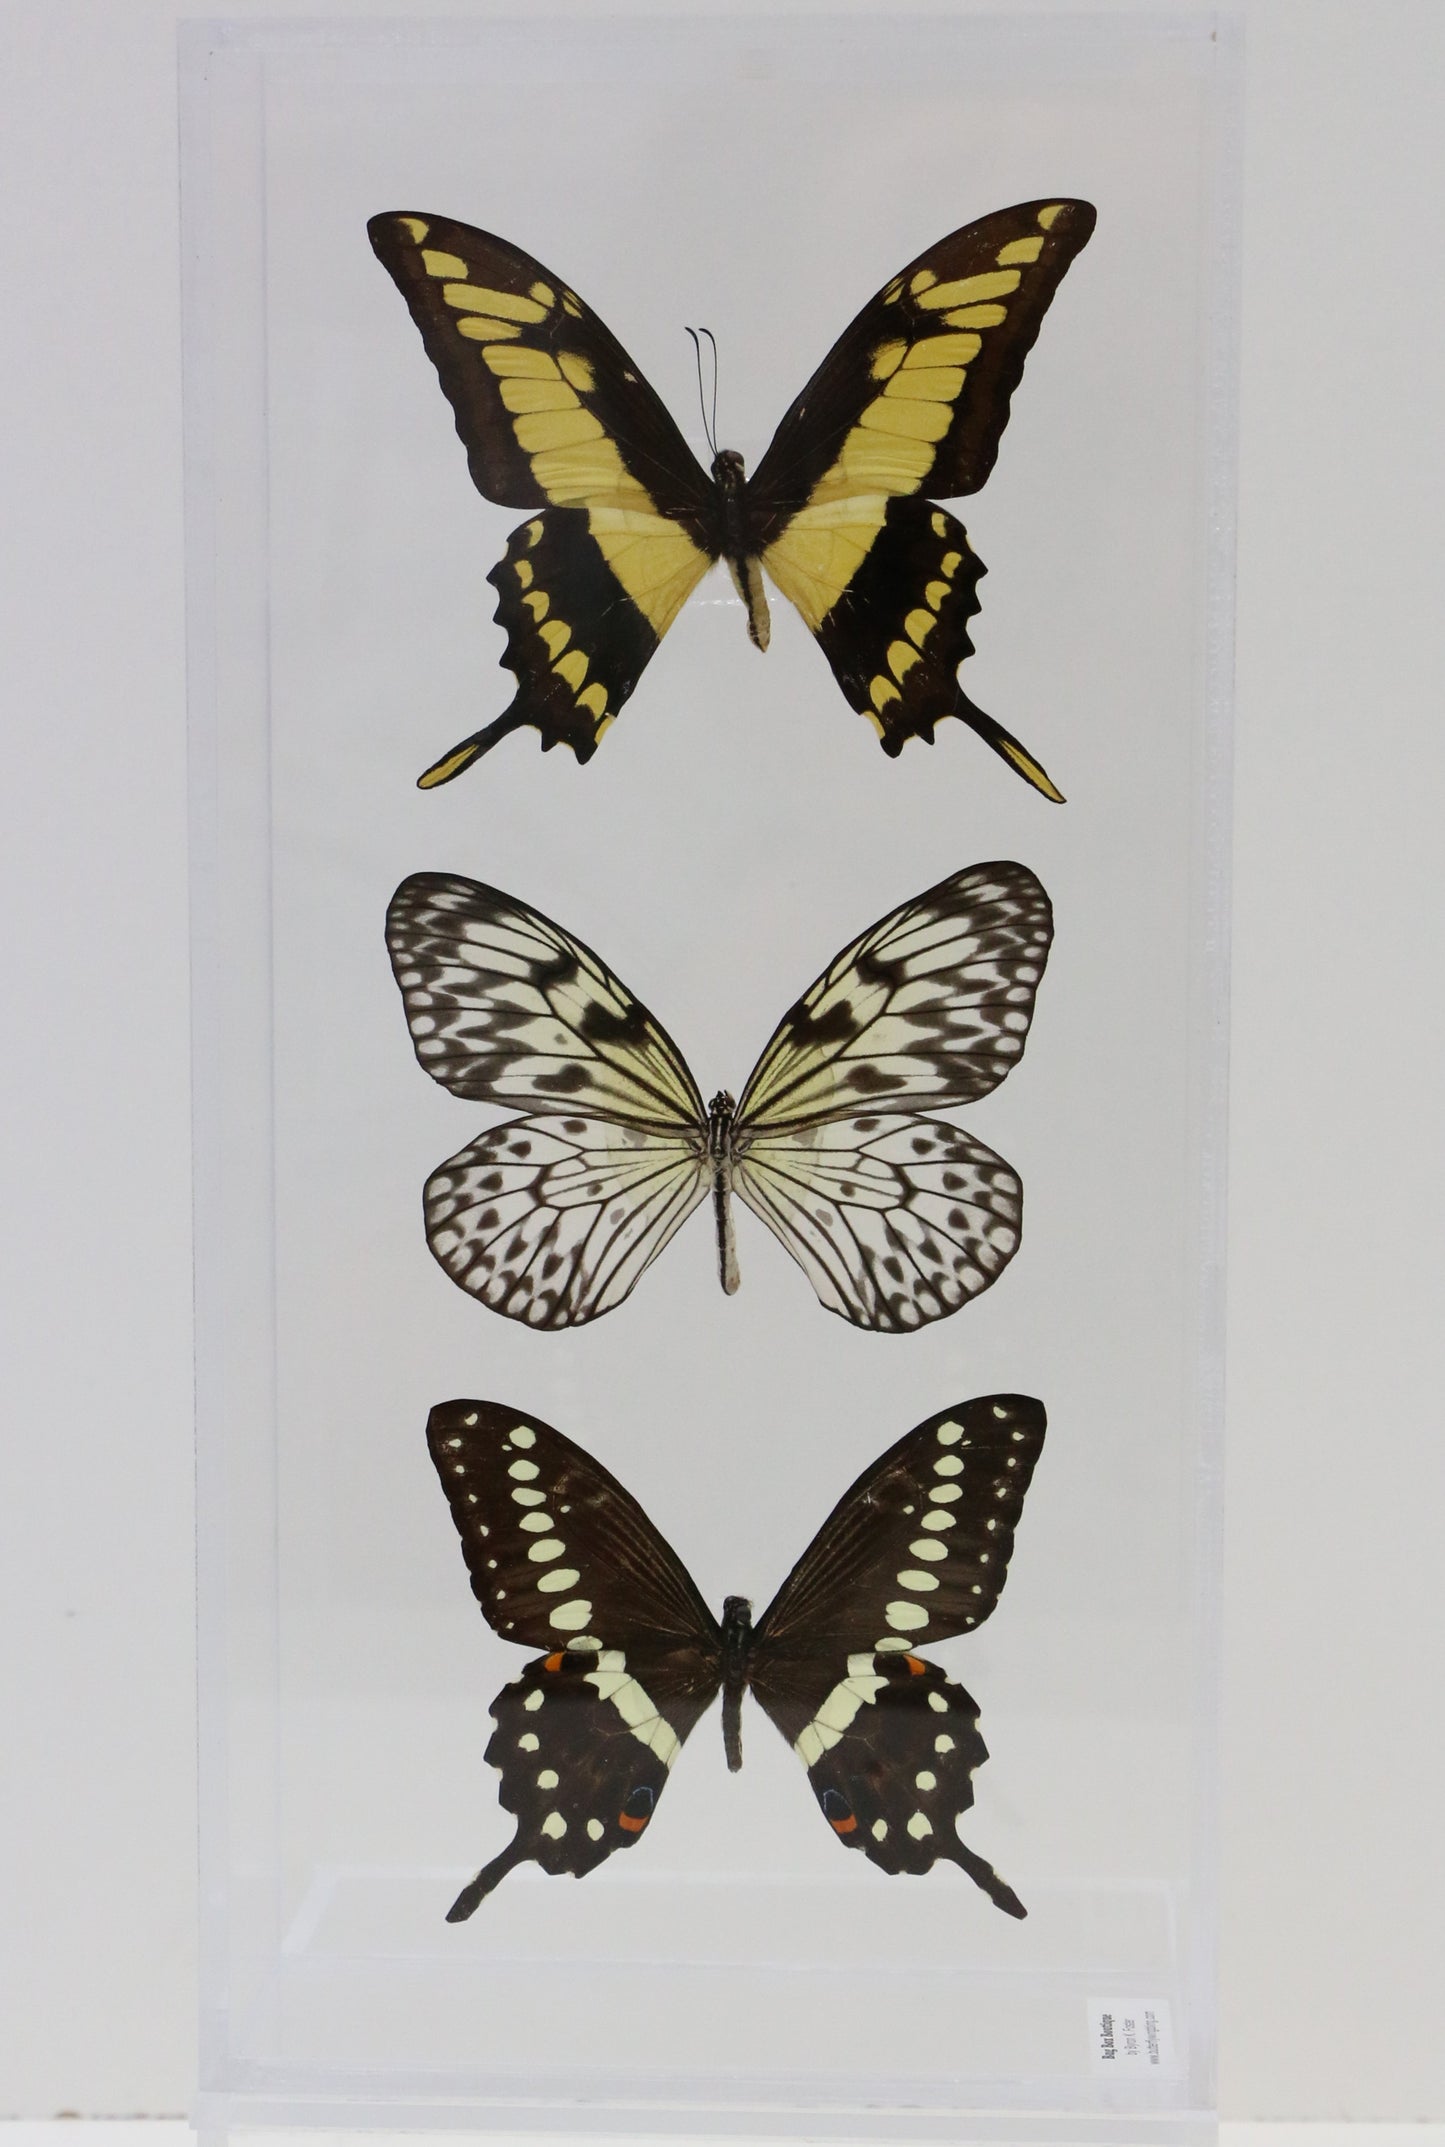 9061201 - Real Butterfly Acrylic Display Box - 6" X 12" - 3 Butterflies